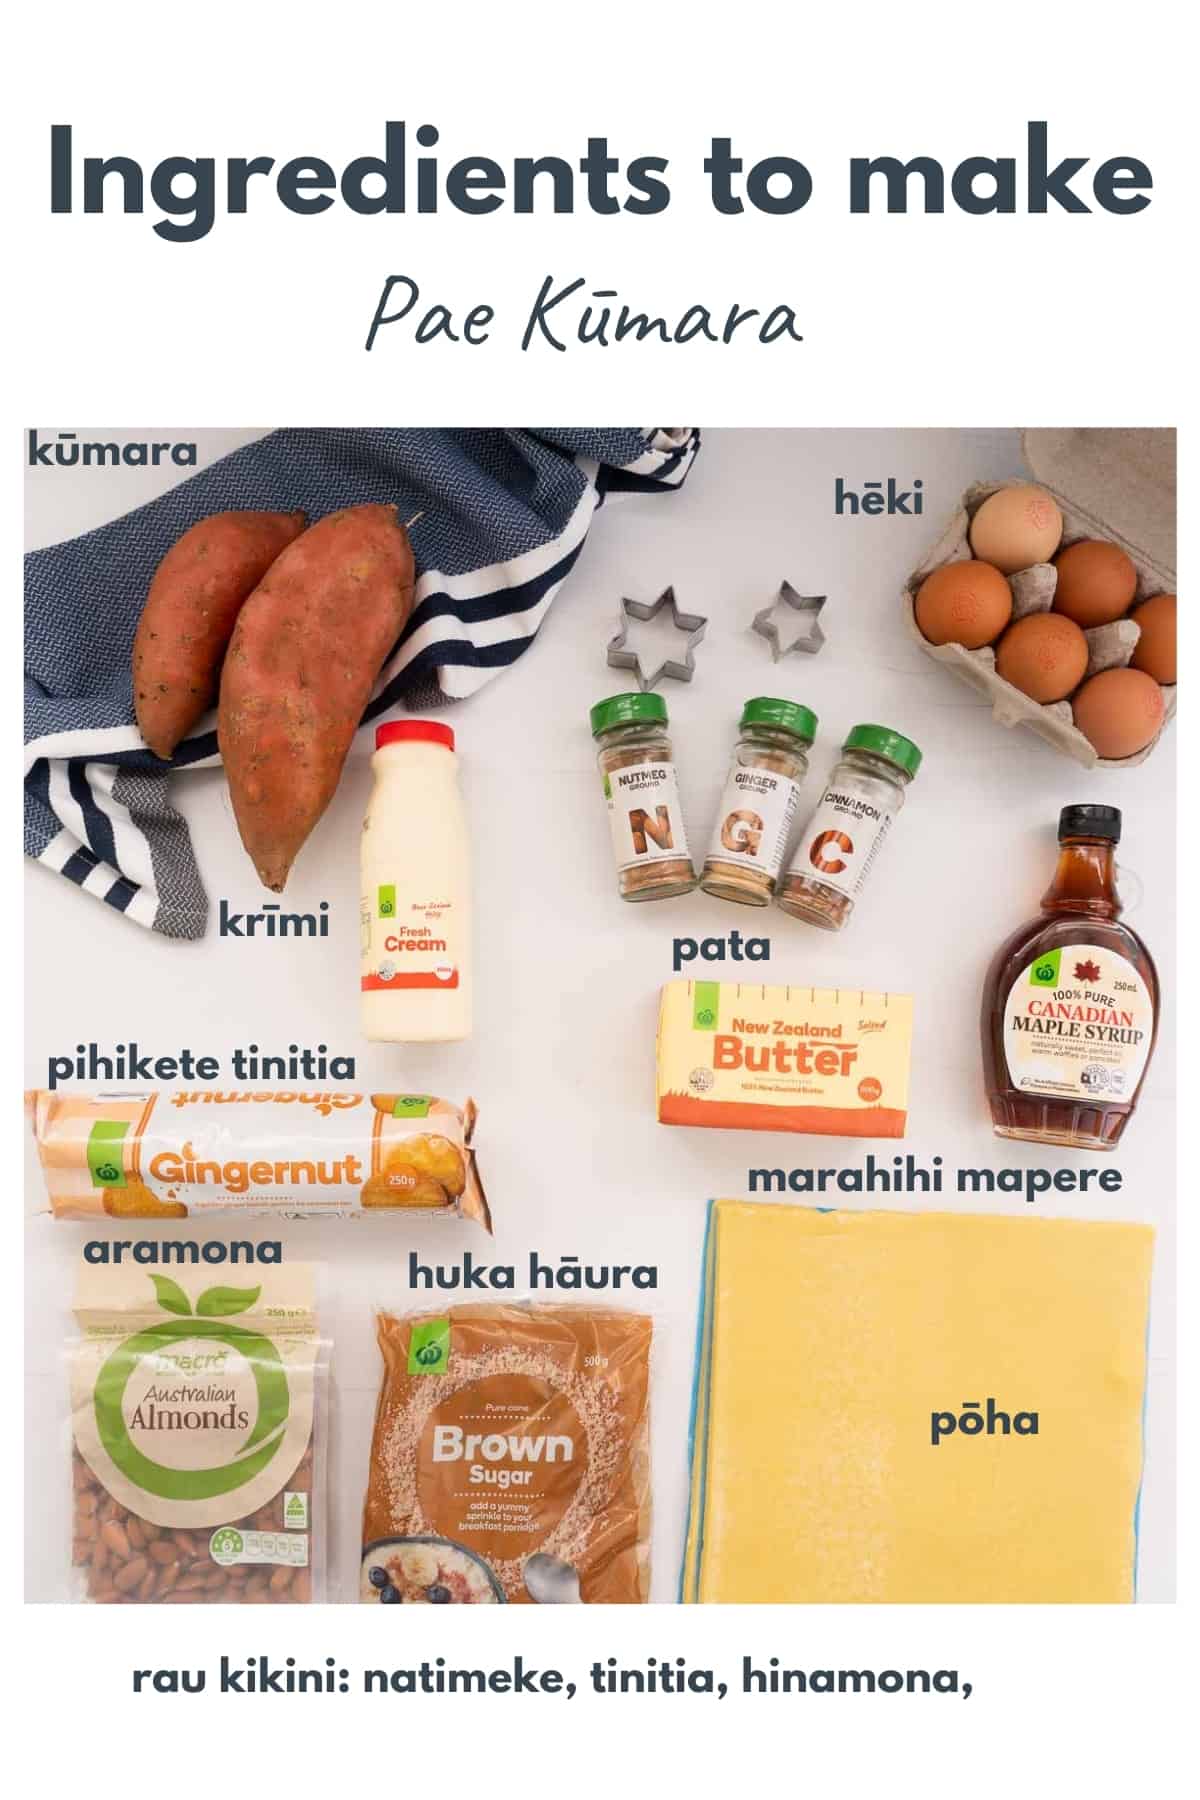 The ingredients to make sweet kumara pie with ingredients labeled in maori.